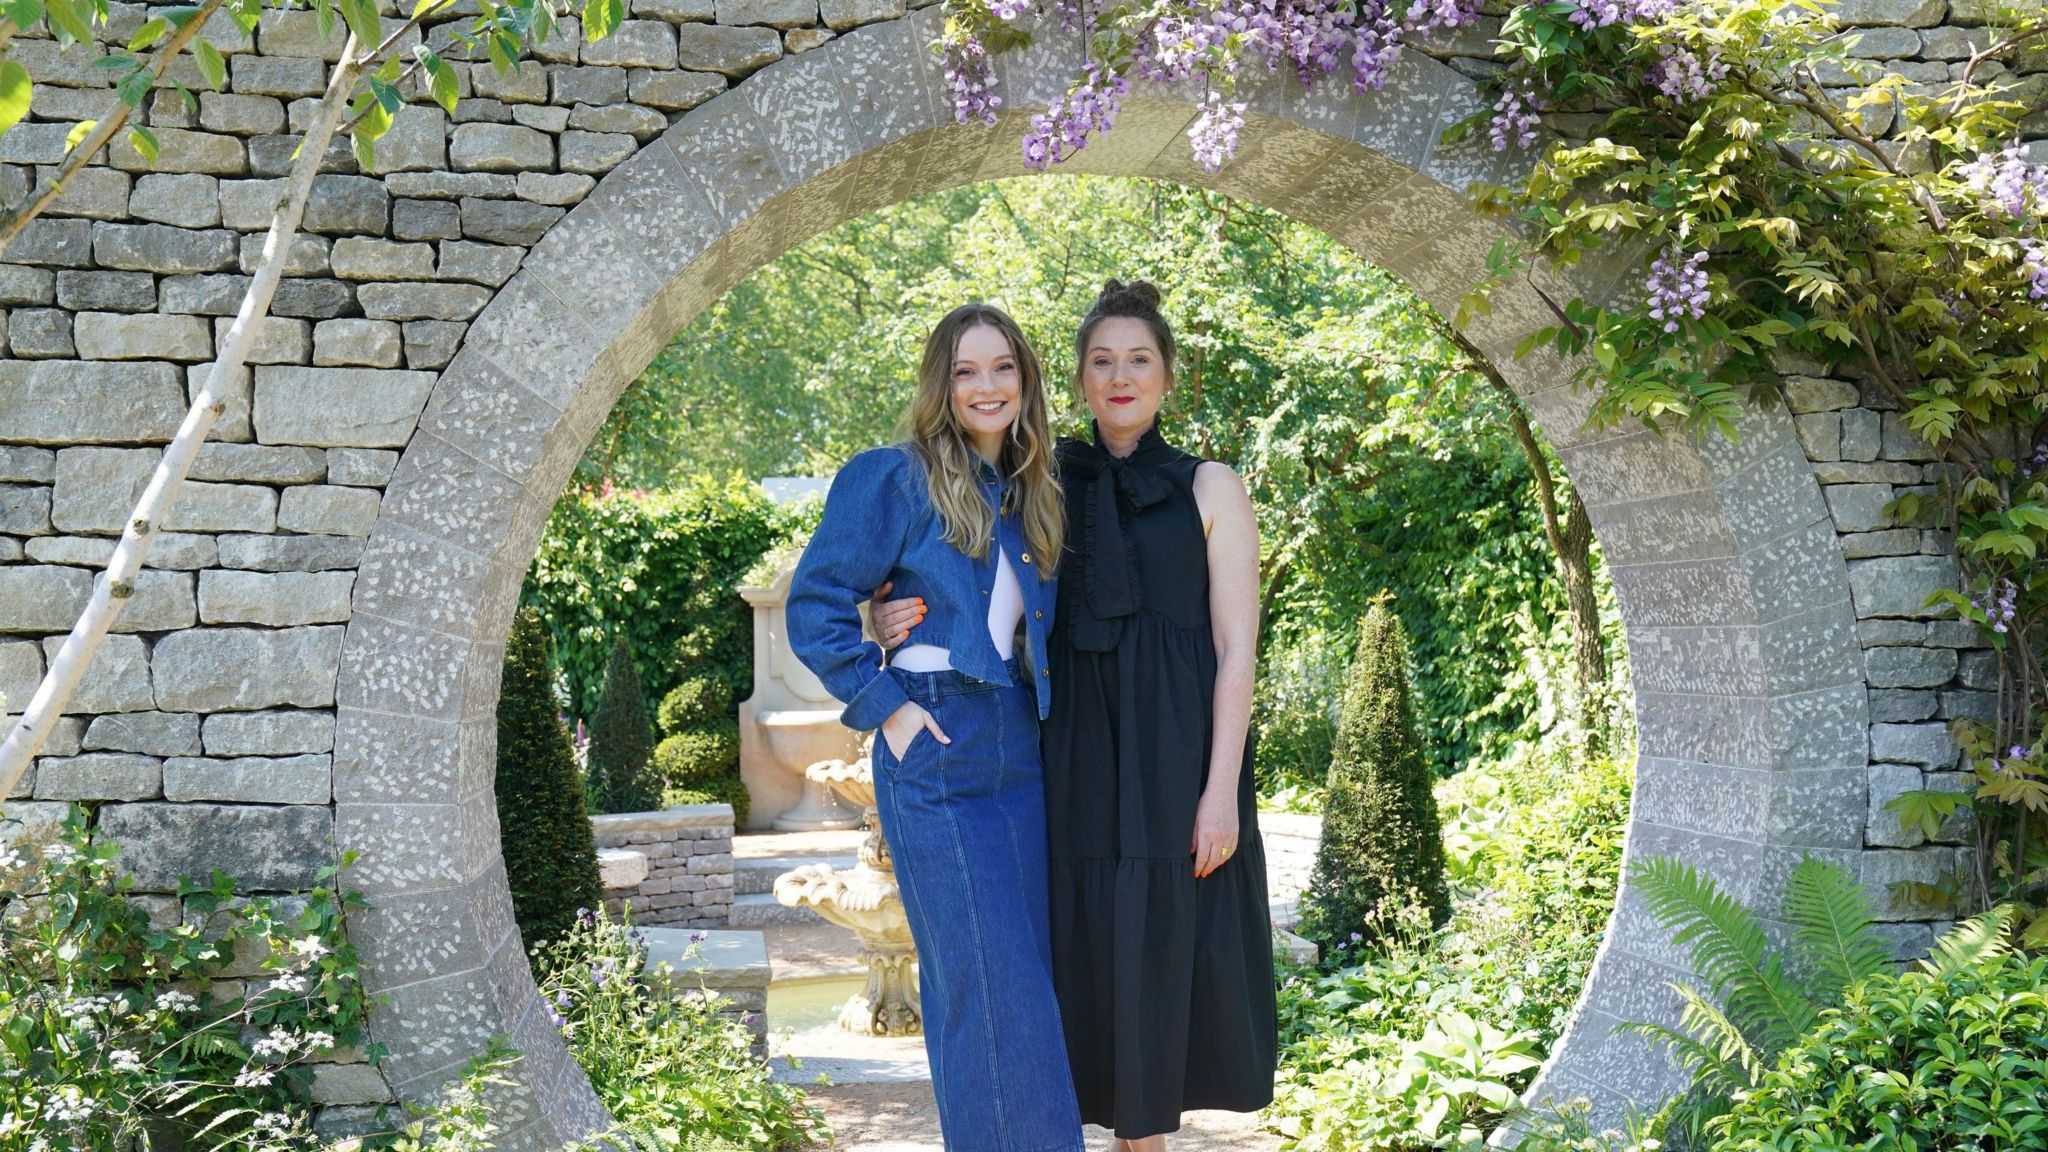 ridgerton cast members Hannah Dodd (left) and Ruth Gemmell (right) in the Bridgerton Garden, during the RHS Chelsea Flower Show at the Royal Hospital Chelsea in London